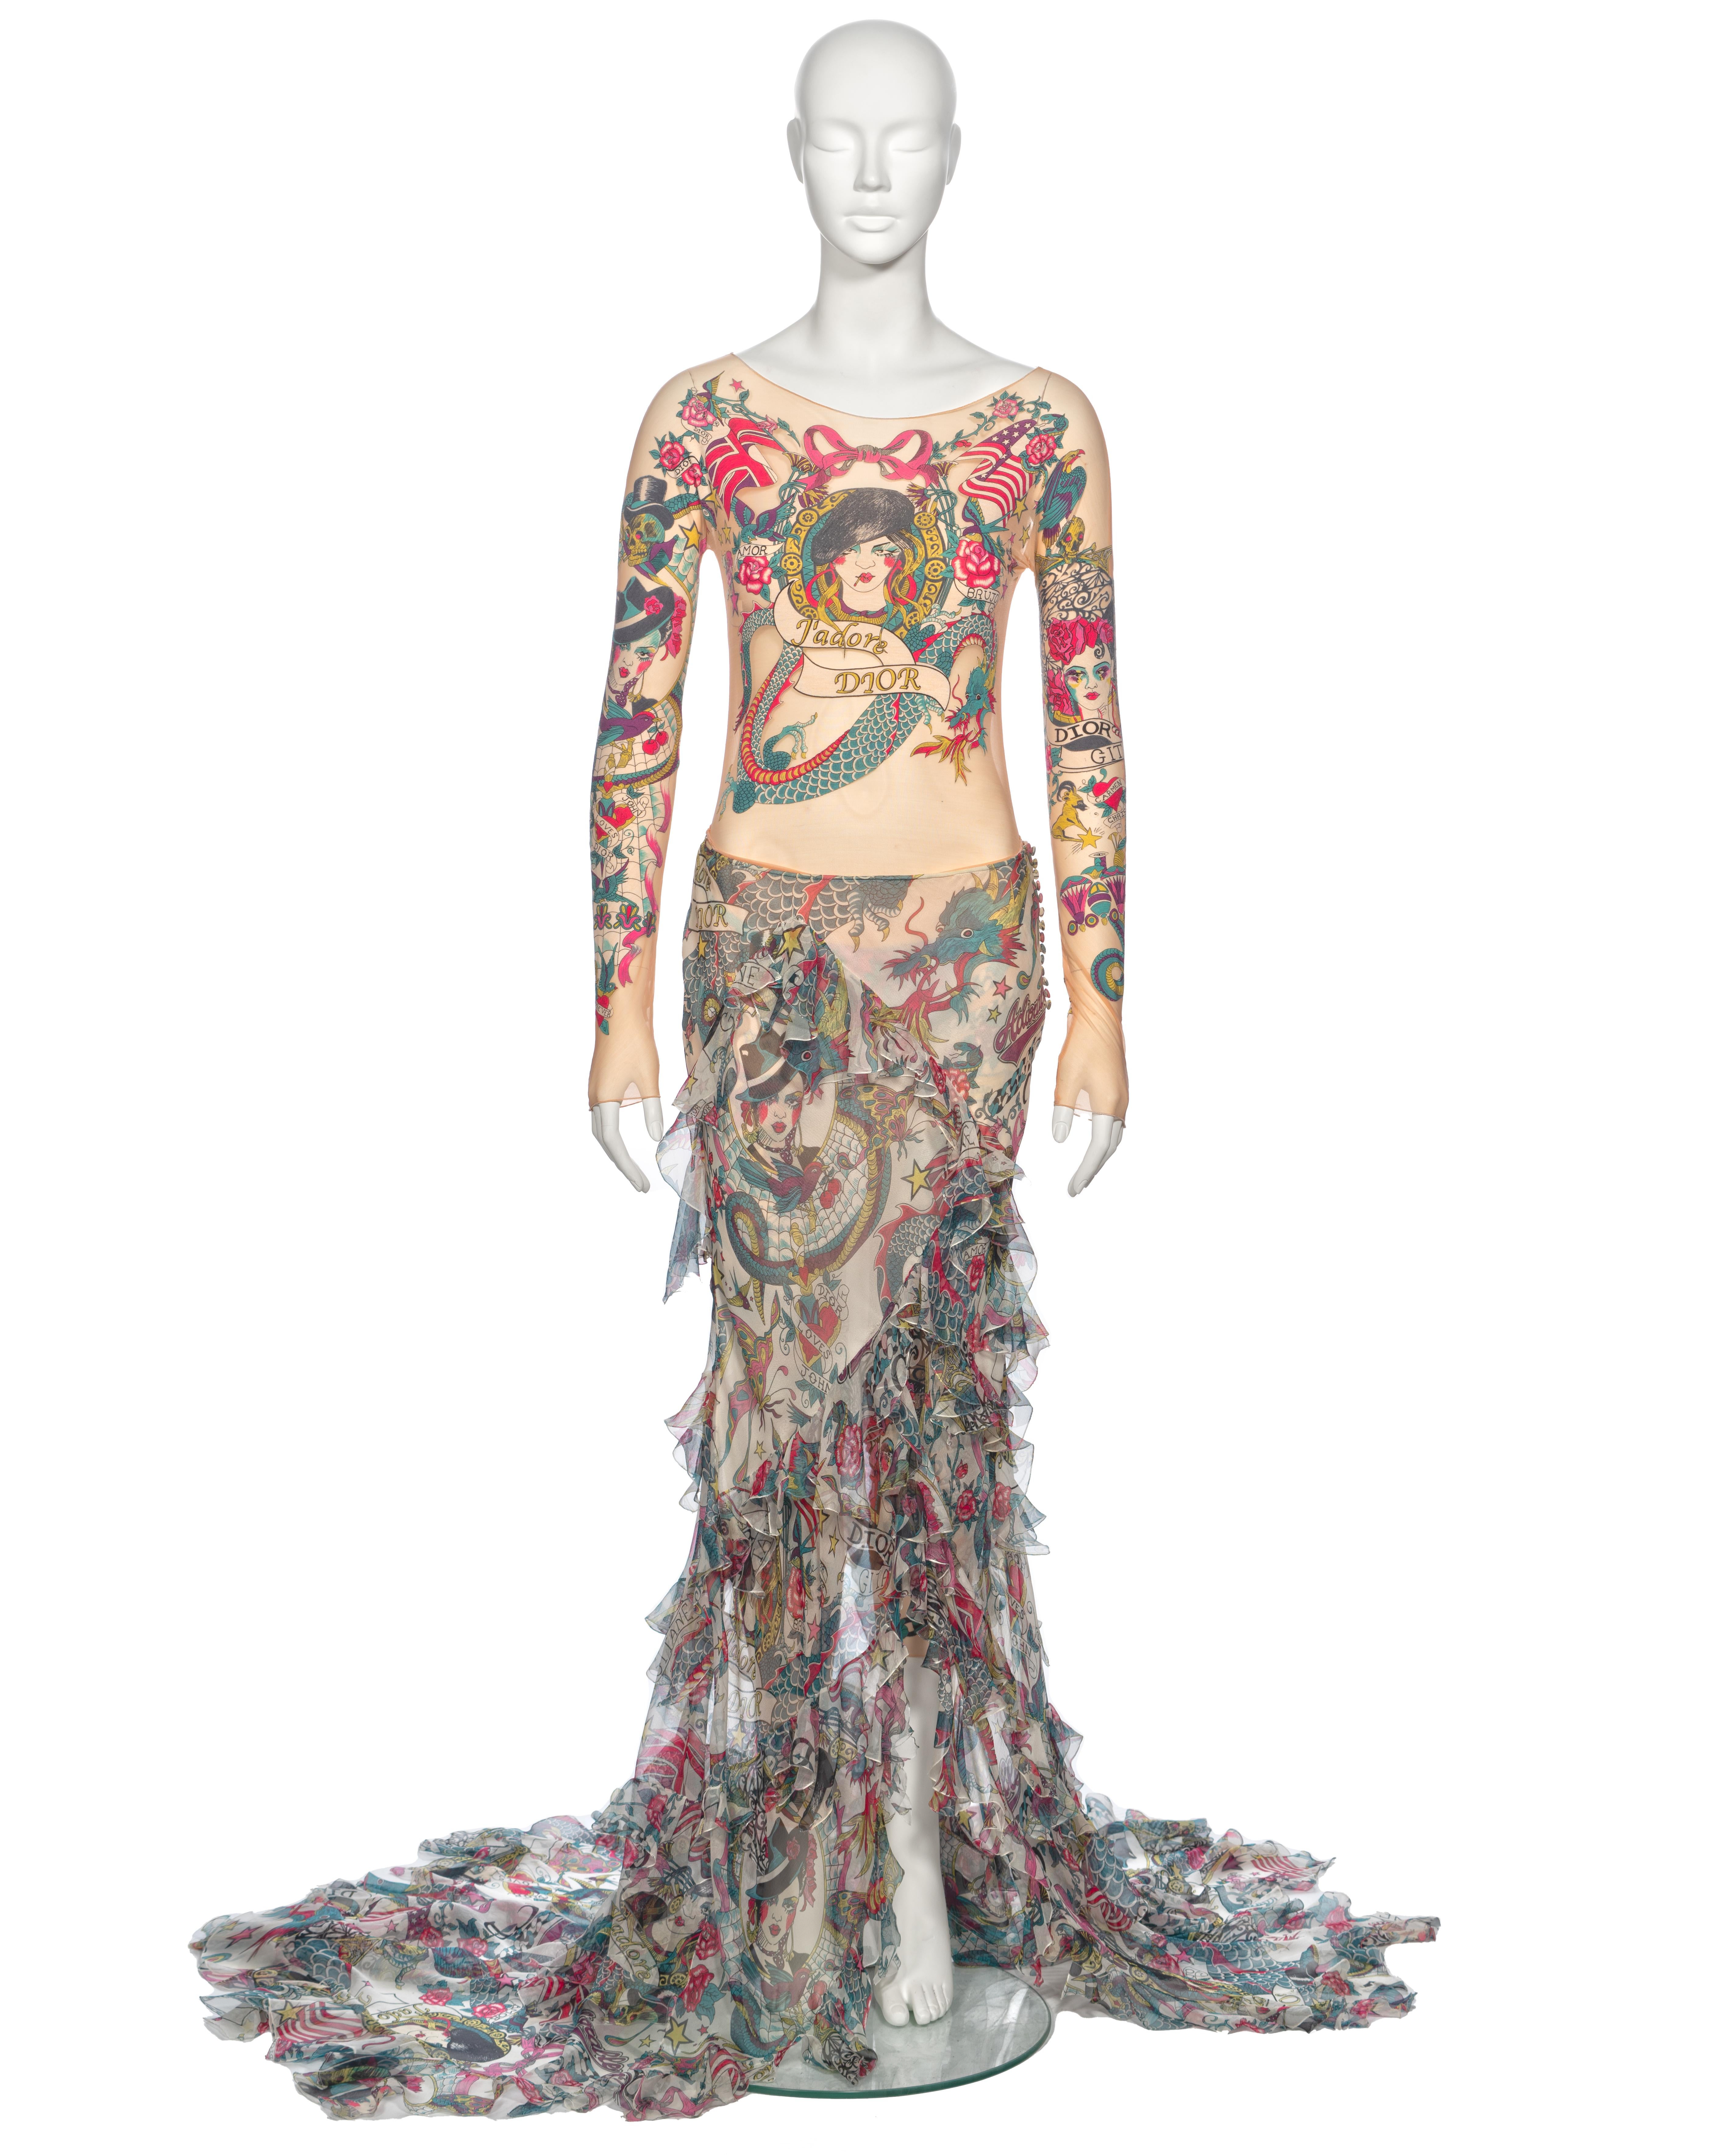 ▪ Archival Christian Dior Tattoo Print Evening Ensemble
▪ Creative Director: John Galliano
▪ Spring-Summer 2004
▪ Sold by One of a Kind Archive
▪ Museum Grade
▪ Allover multicoloured illustrated tattoo motif 
▪ Nude mesh long sleeve bodysuit
▪ Nude